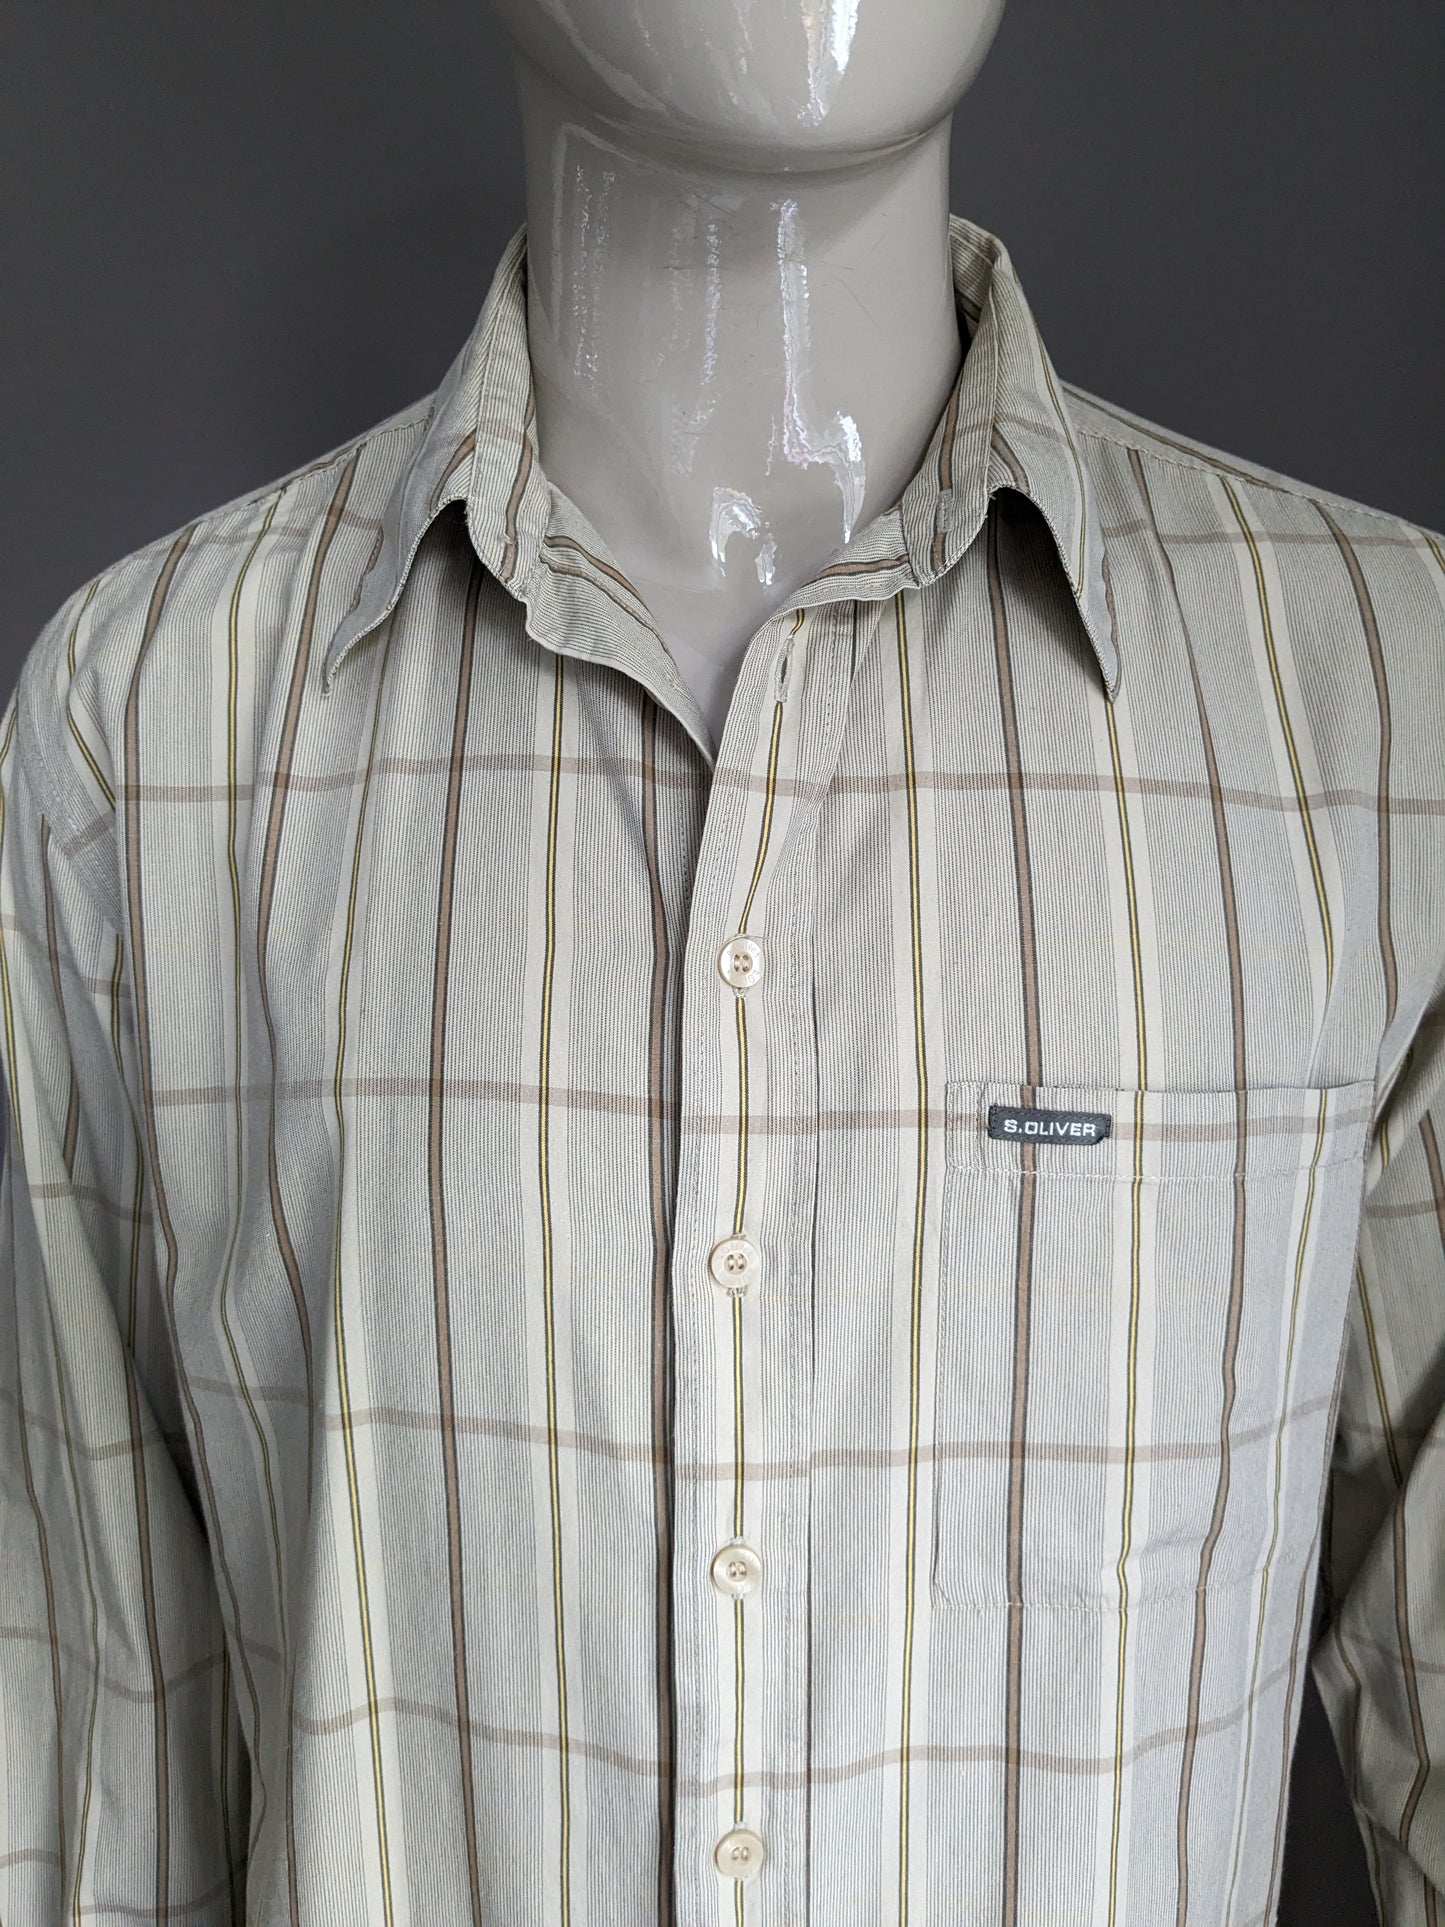 s. Oliver shirt. Beige yellow brown motif. Size L.